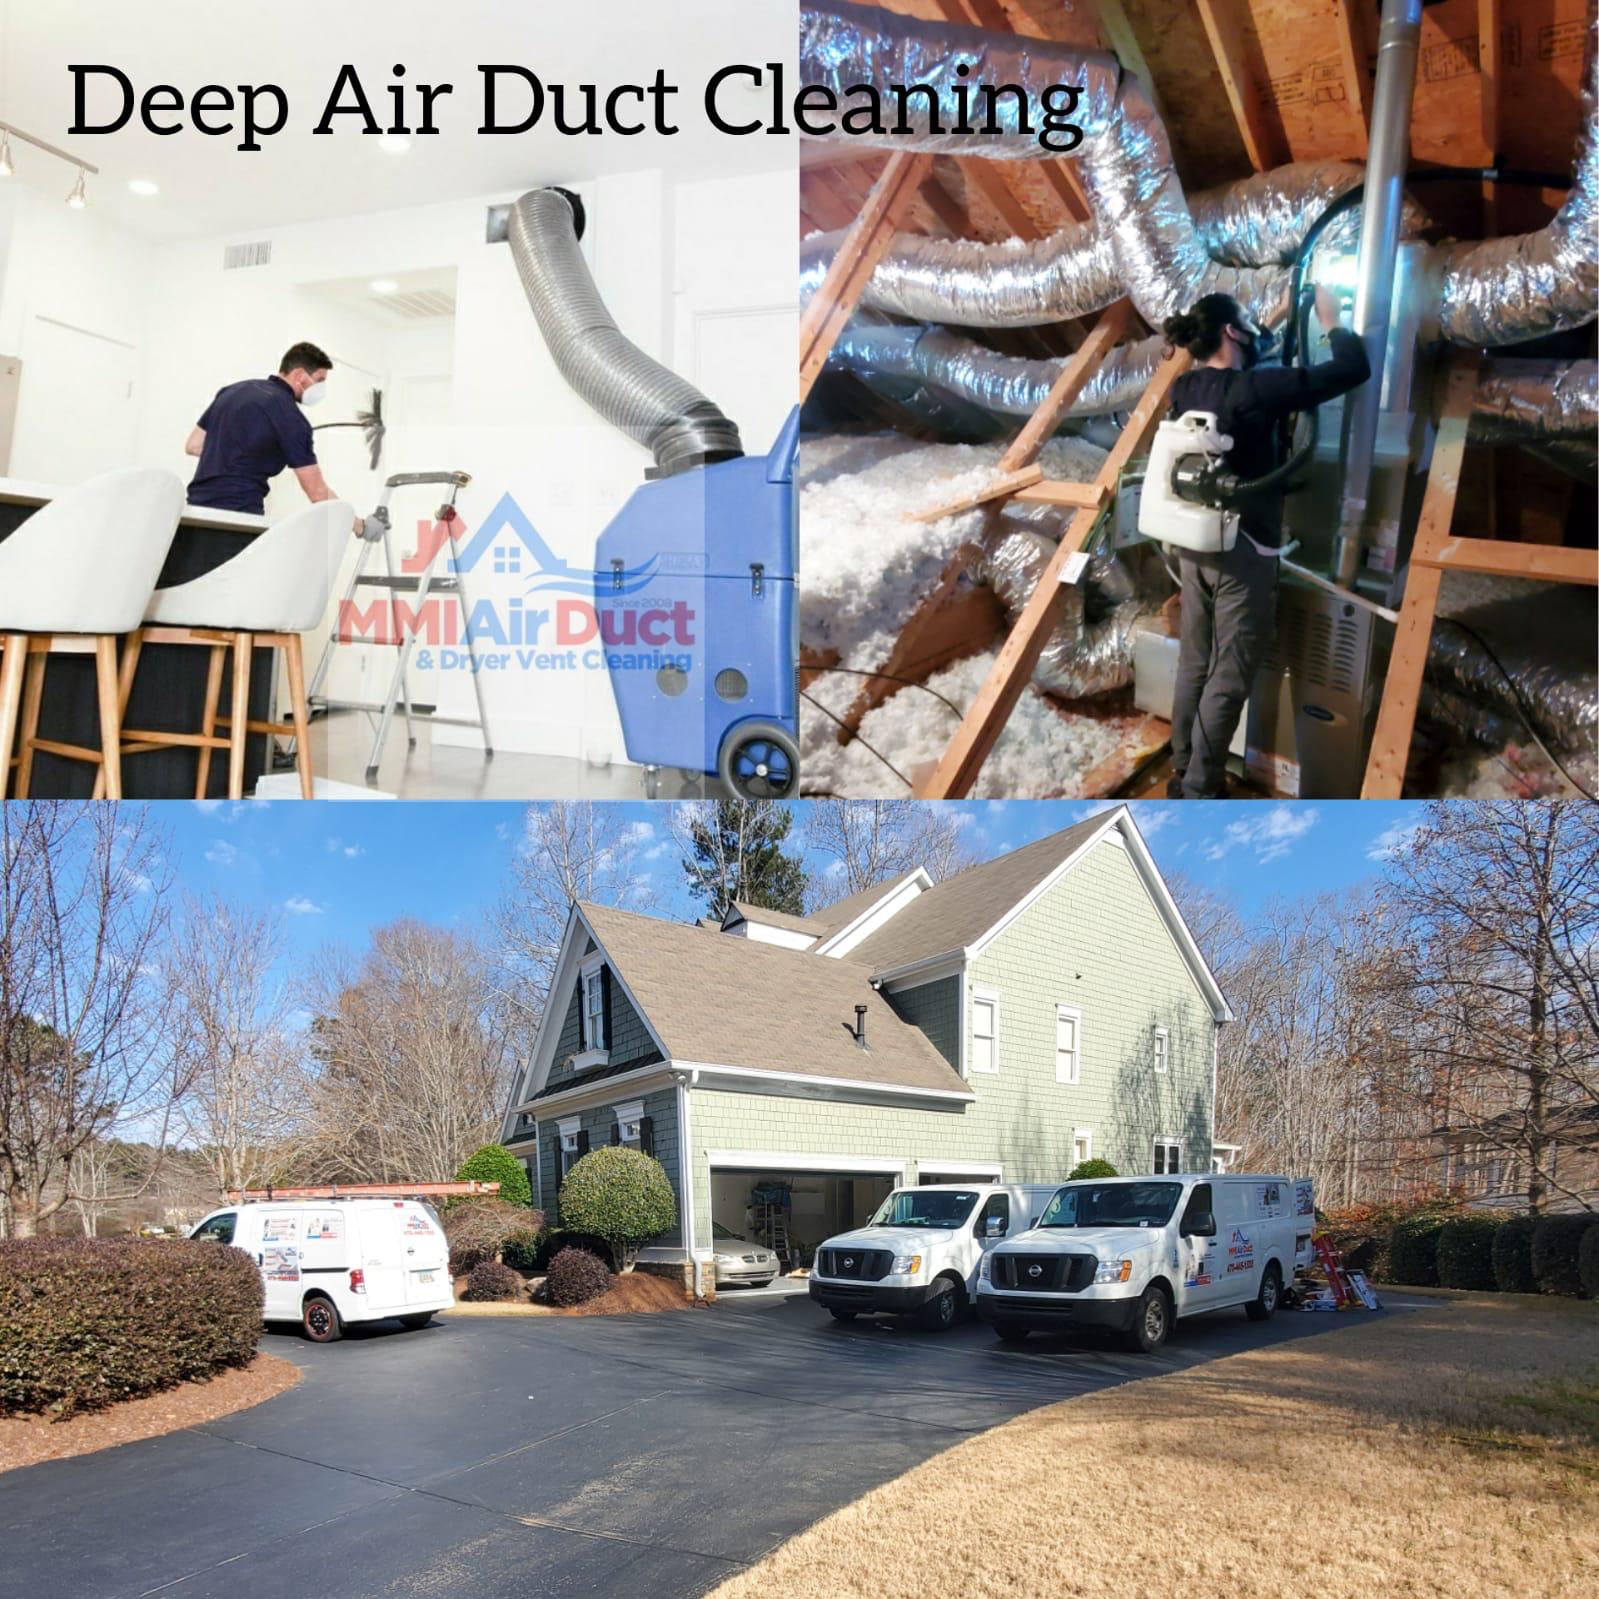 Deep Air Duct Cleaning